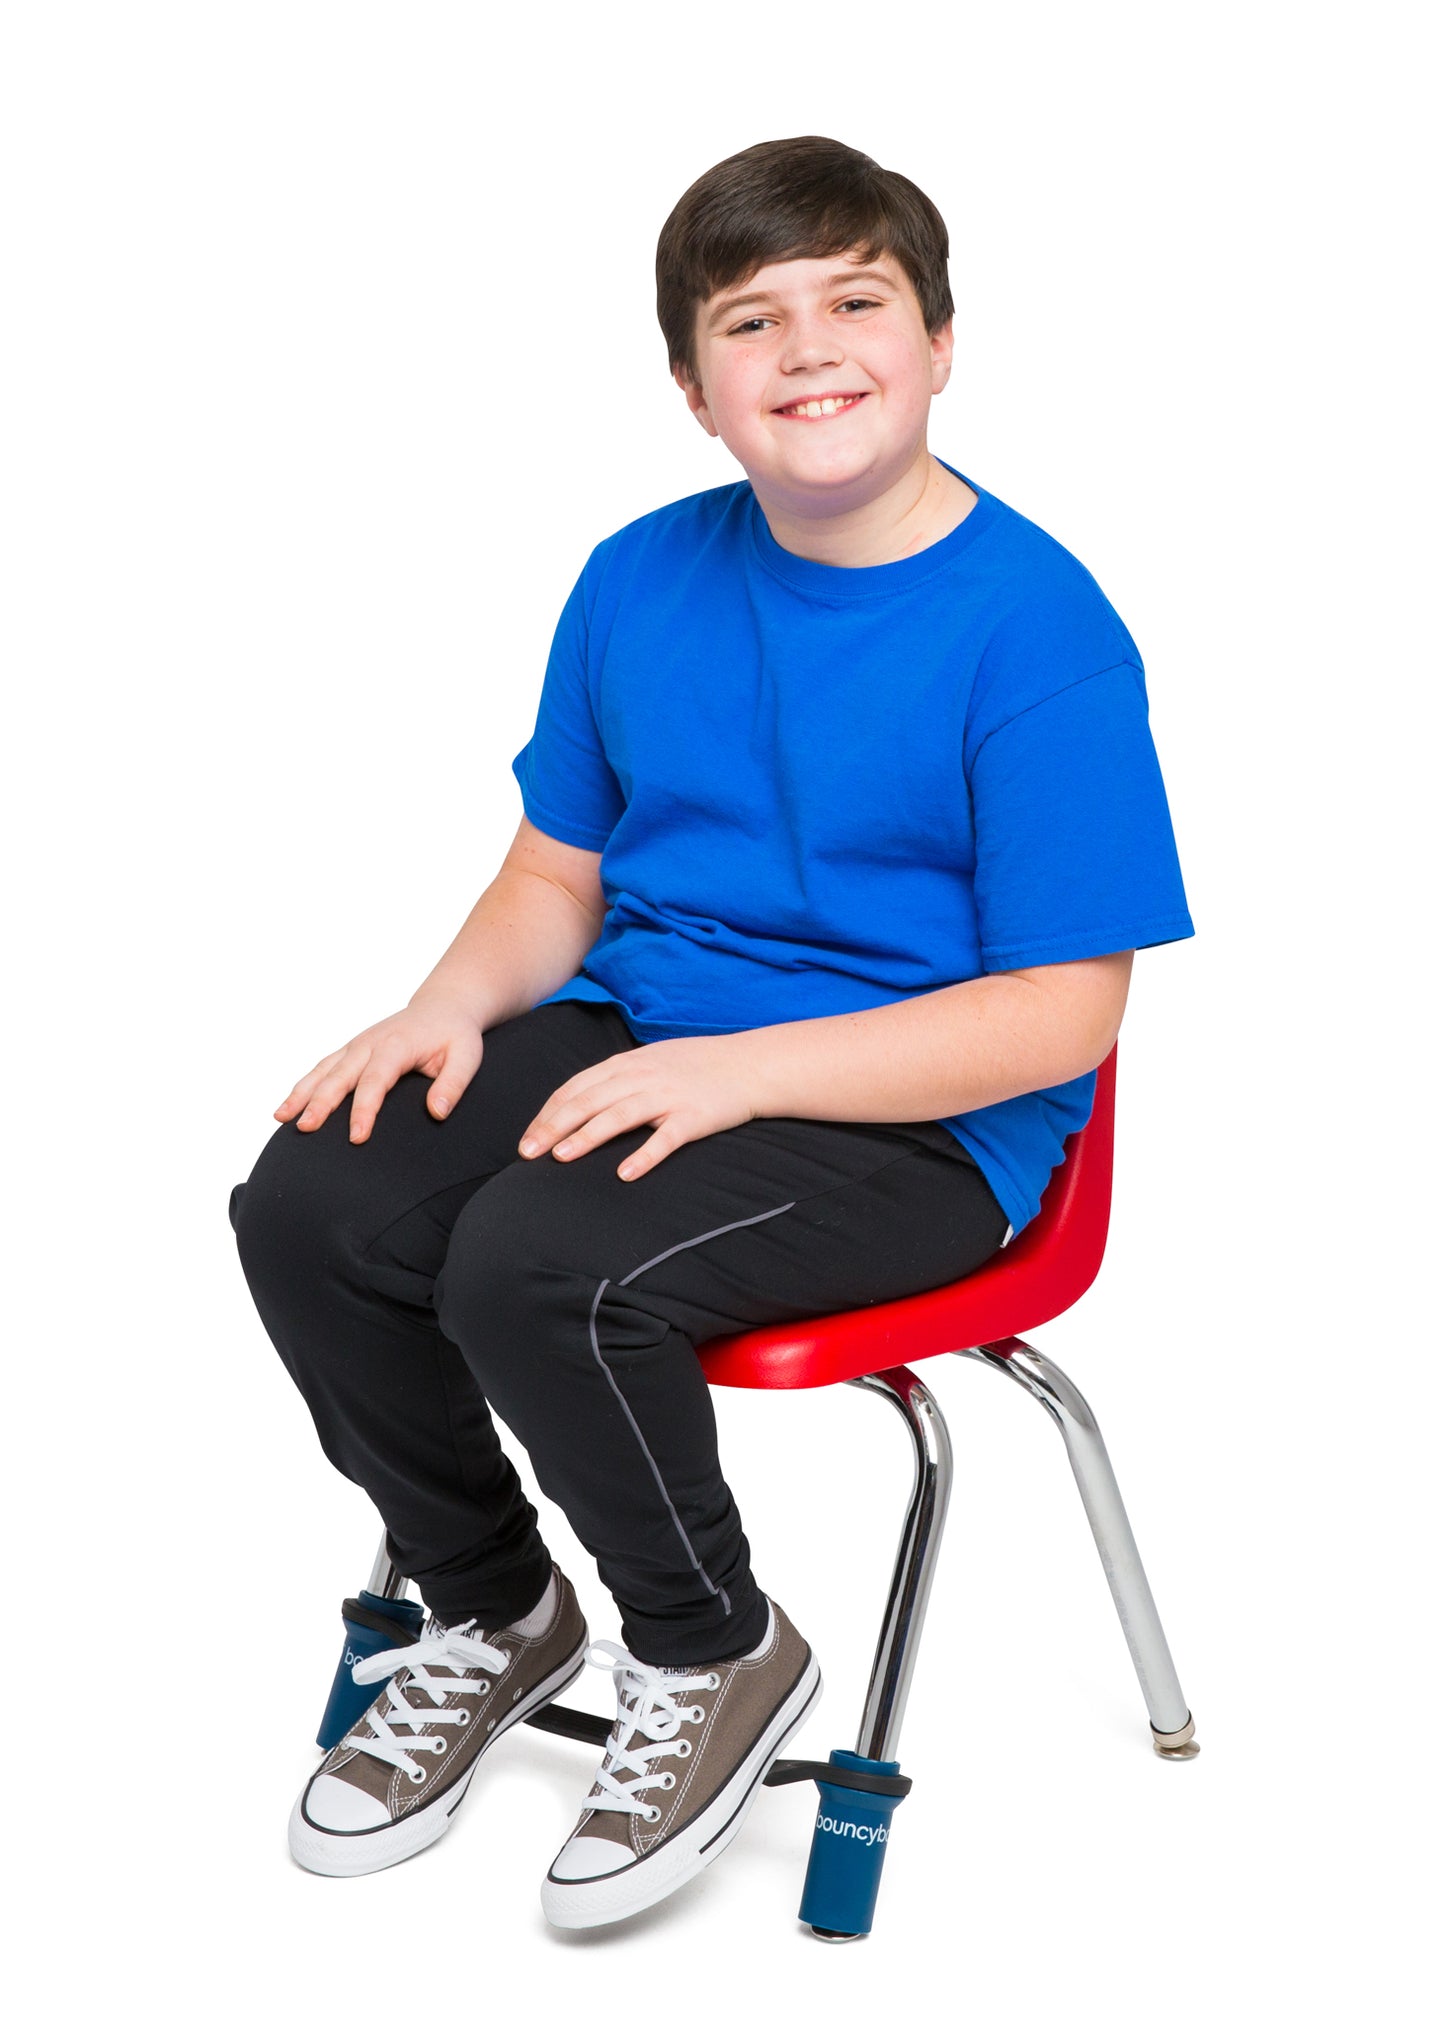 Bouncyband for Middle School/Highschool Chair - Black